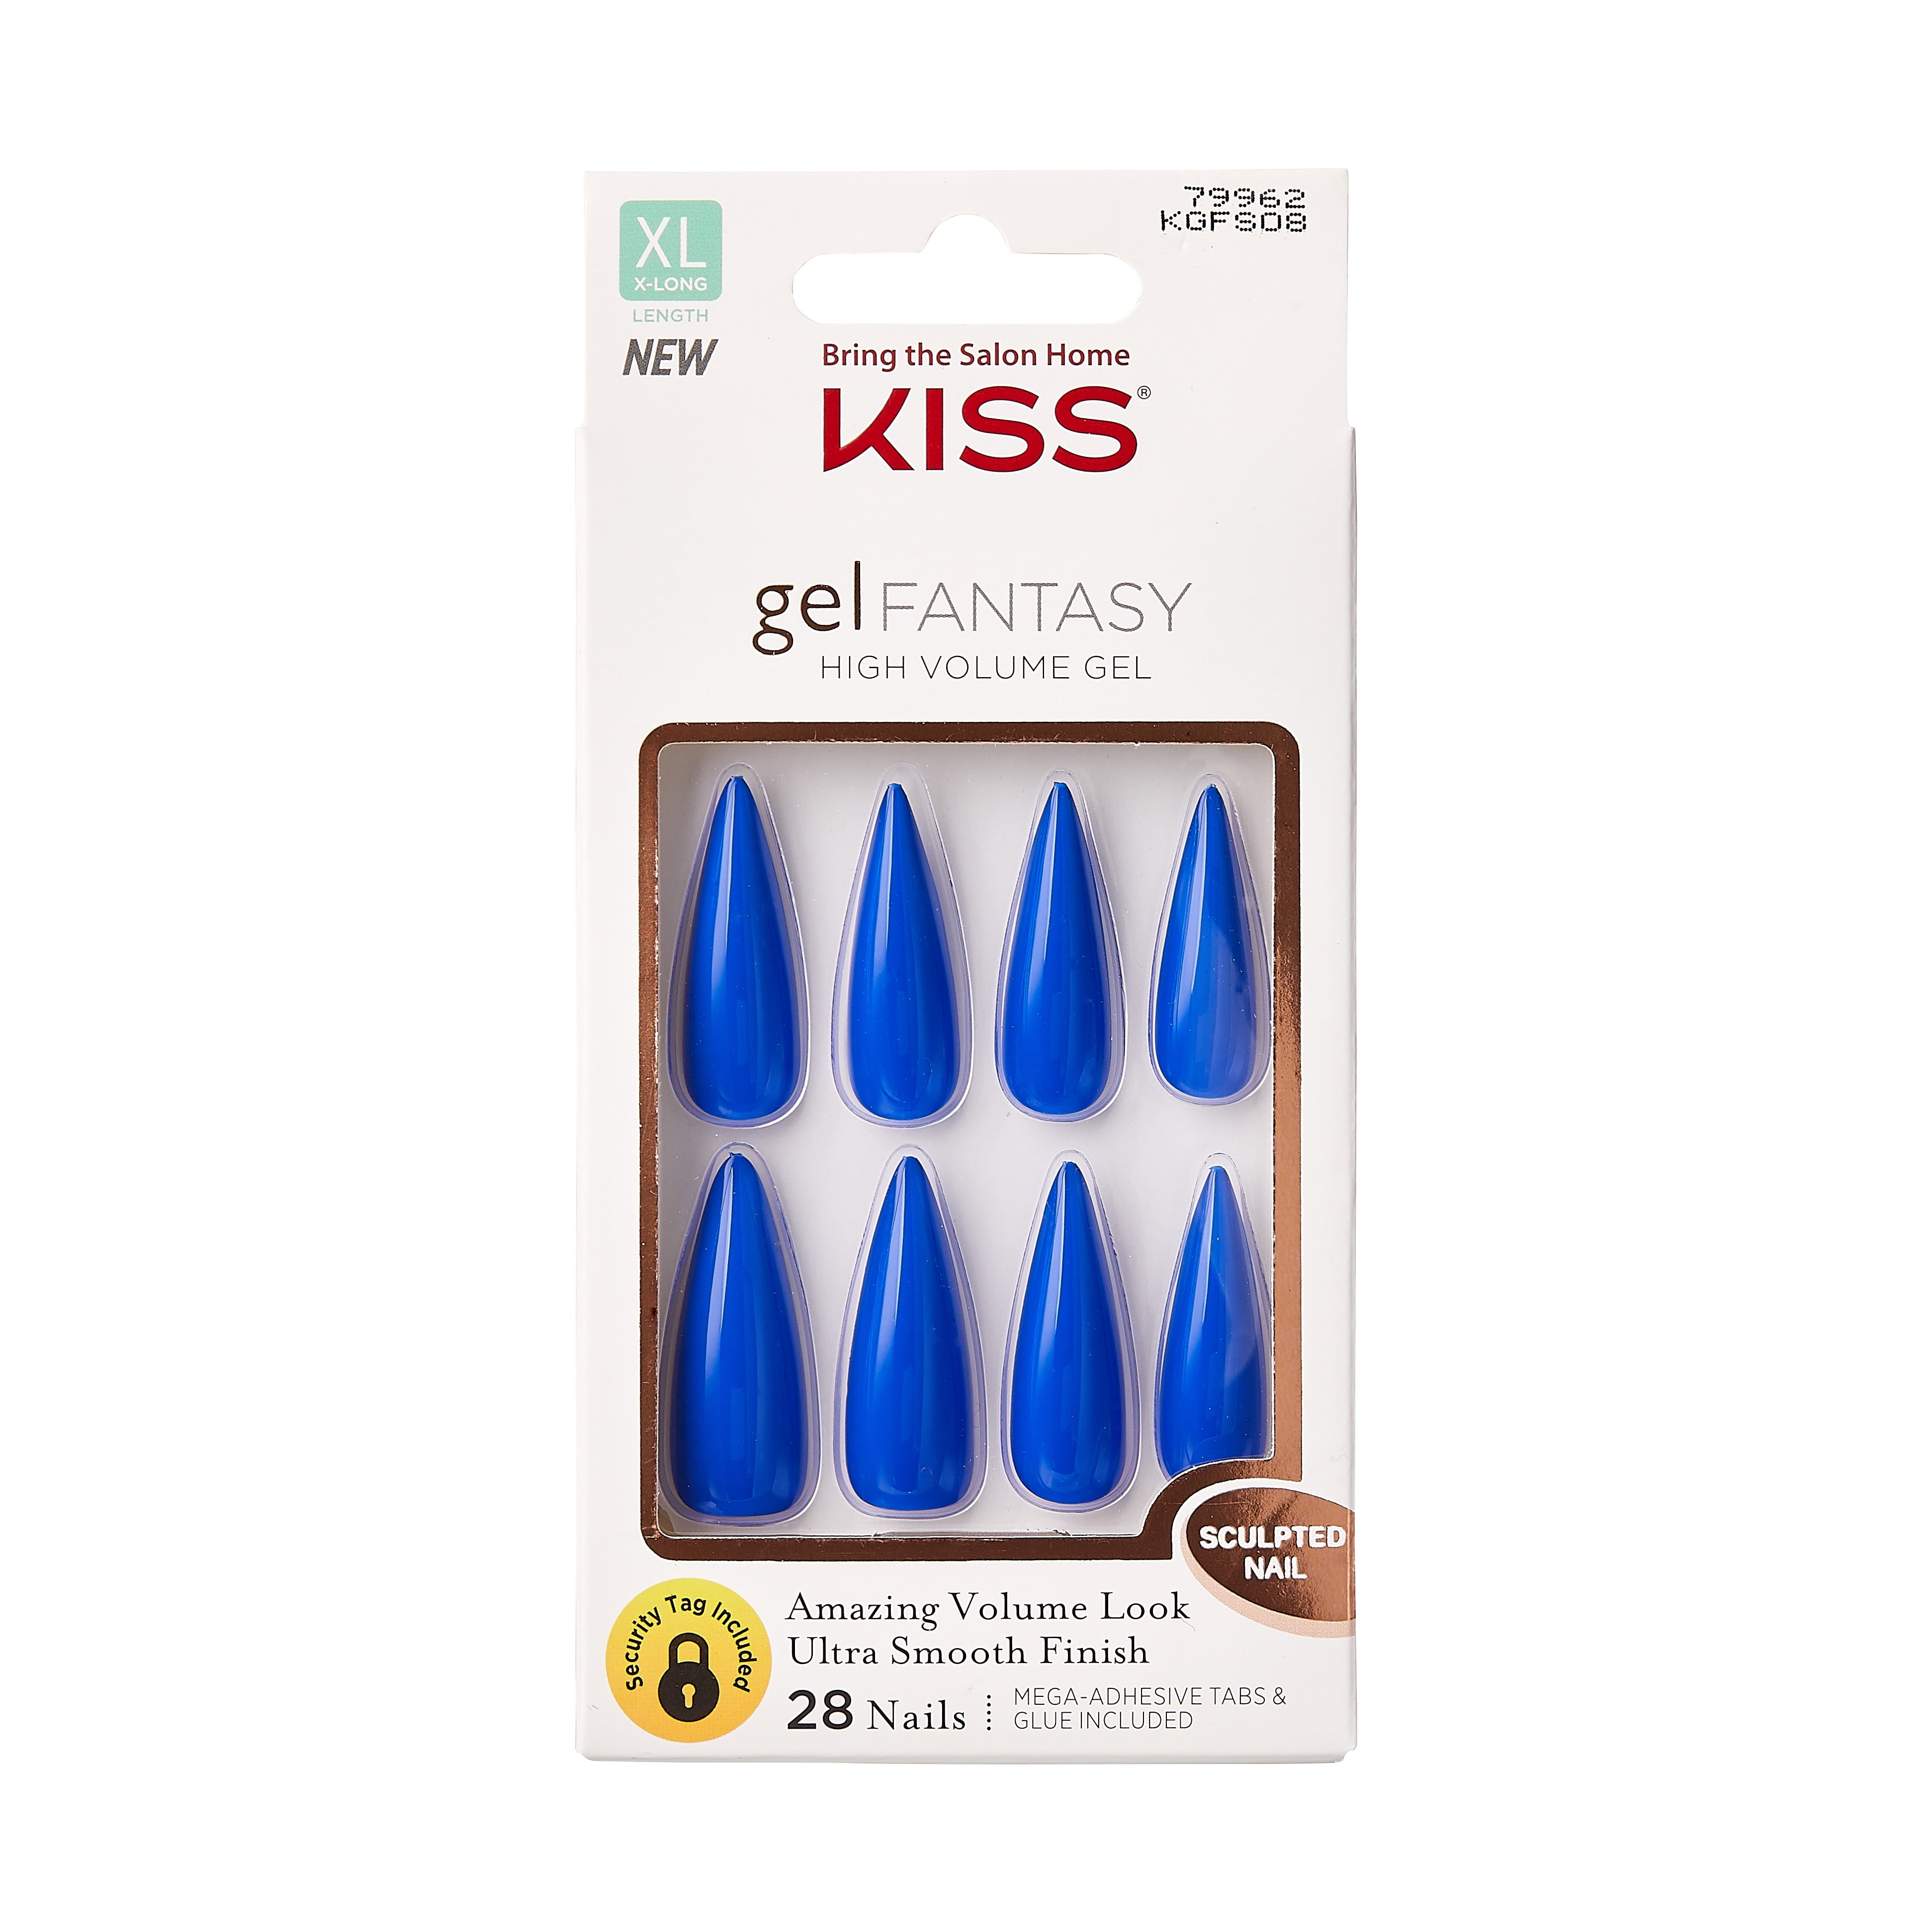 KISS Salon X-tend LED Soft Gel System Color Nails, Solid Pink, Long Coffin,  34 Ct. – KISS USA